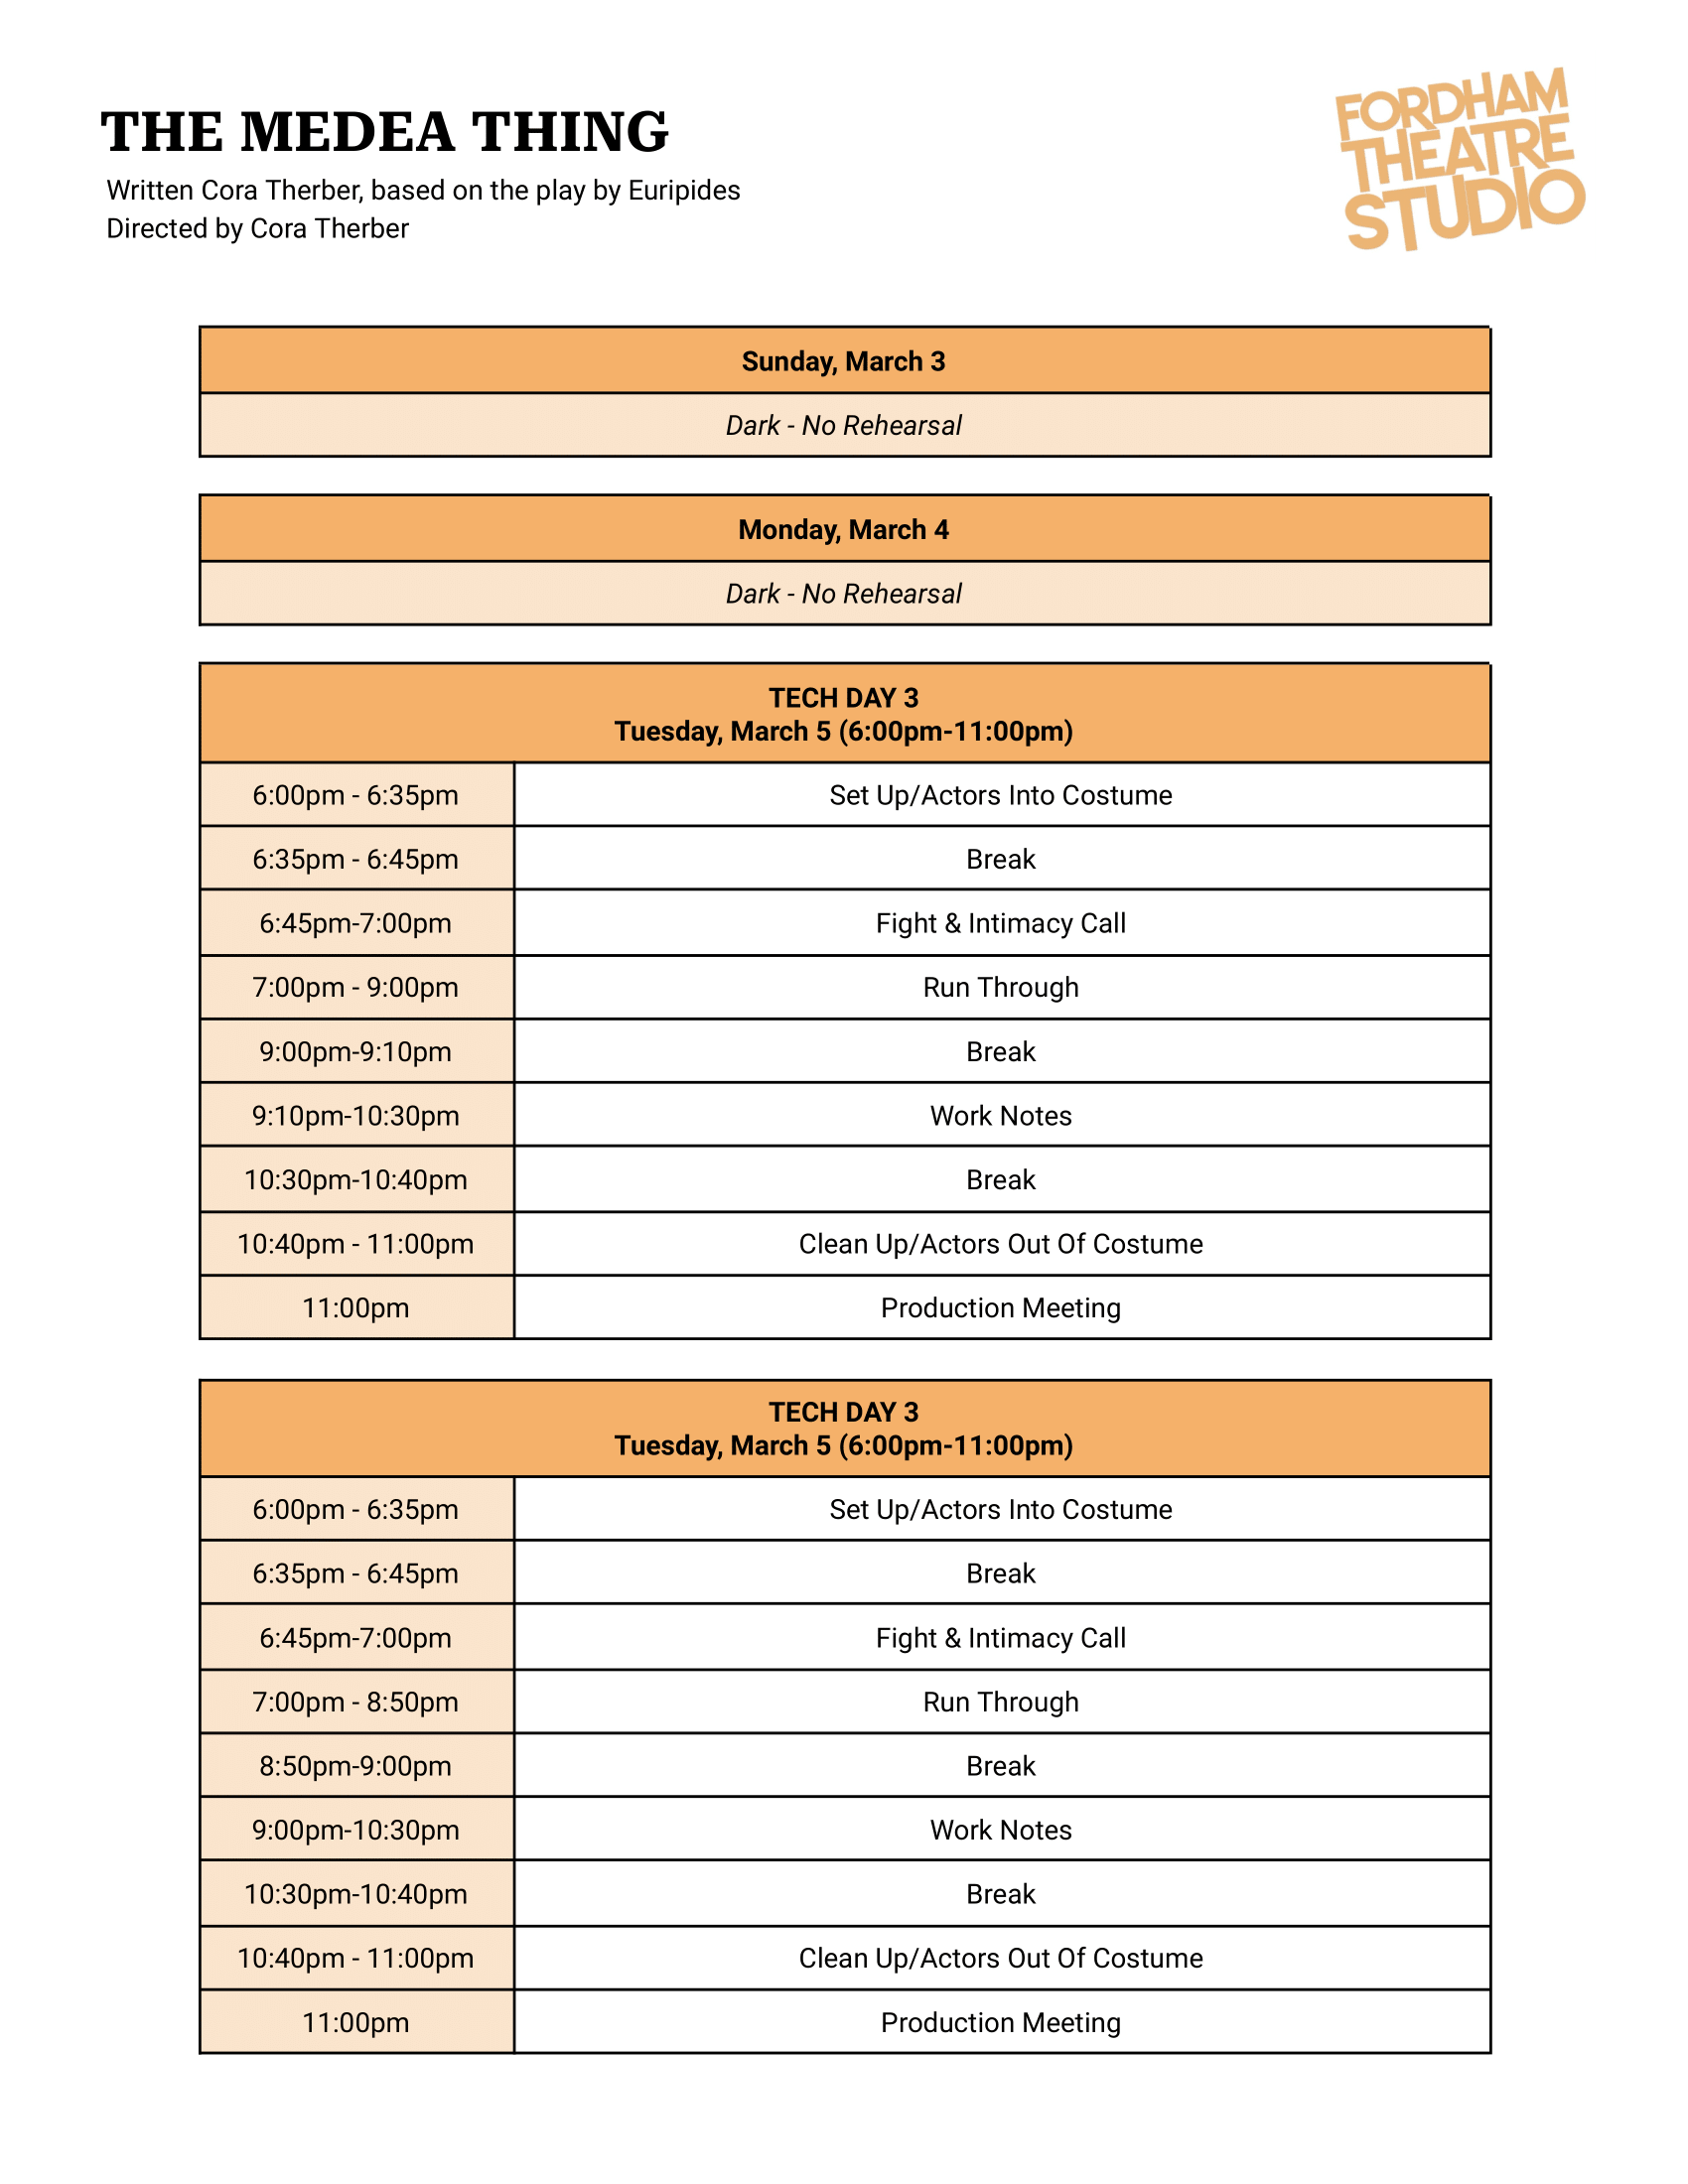 The Medea Thing _ Updated Tech Schedule  (1)-2.png